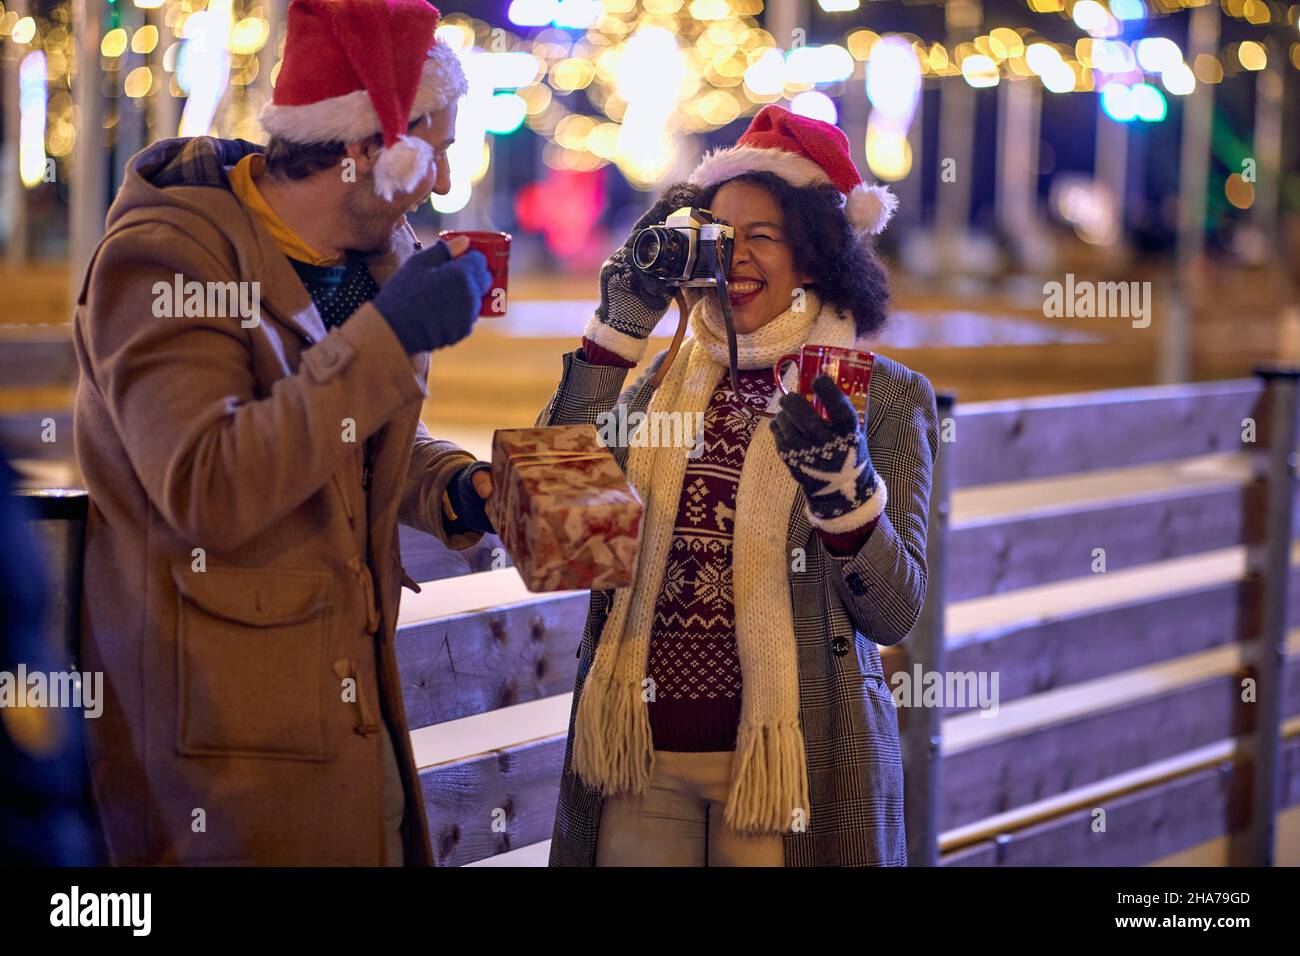 Woman taking a photo smiling boyfriend at christmas festival on a snowy weather Stock Photo